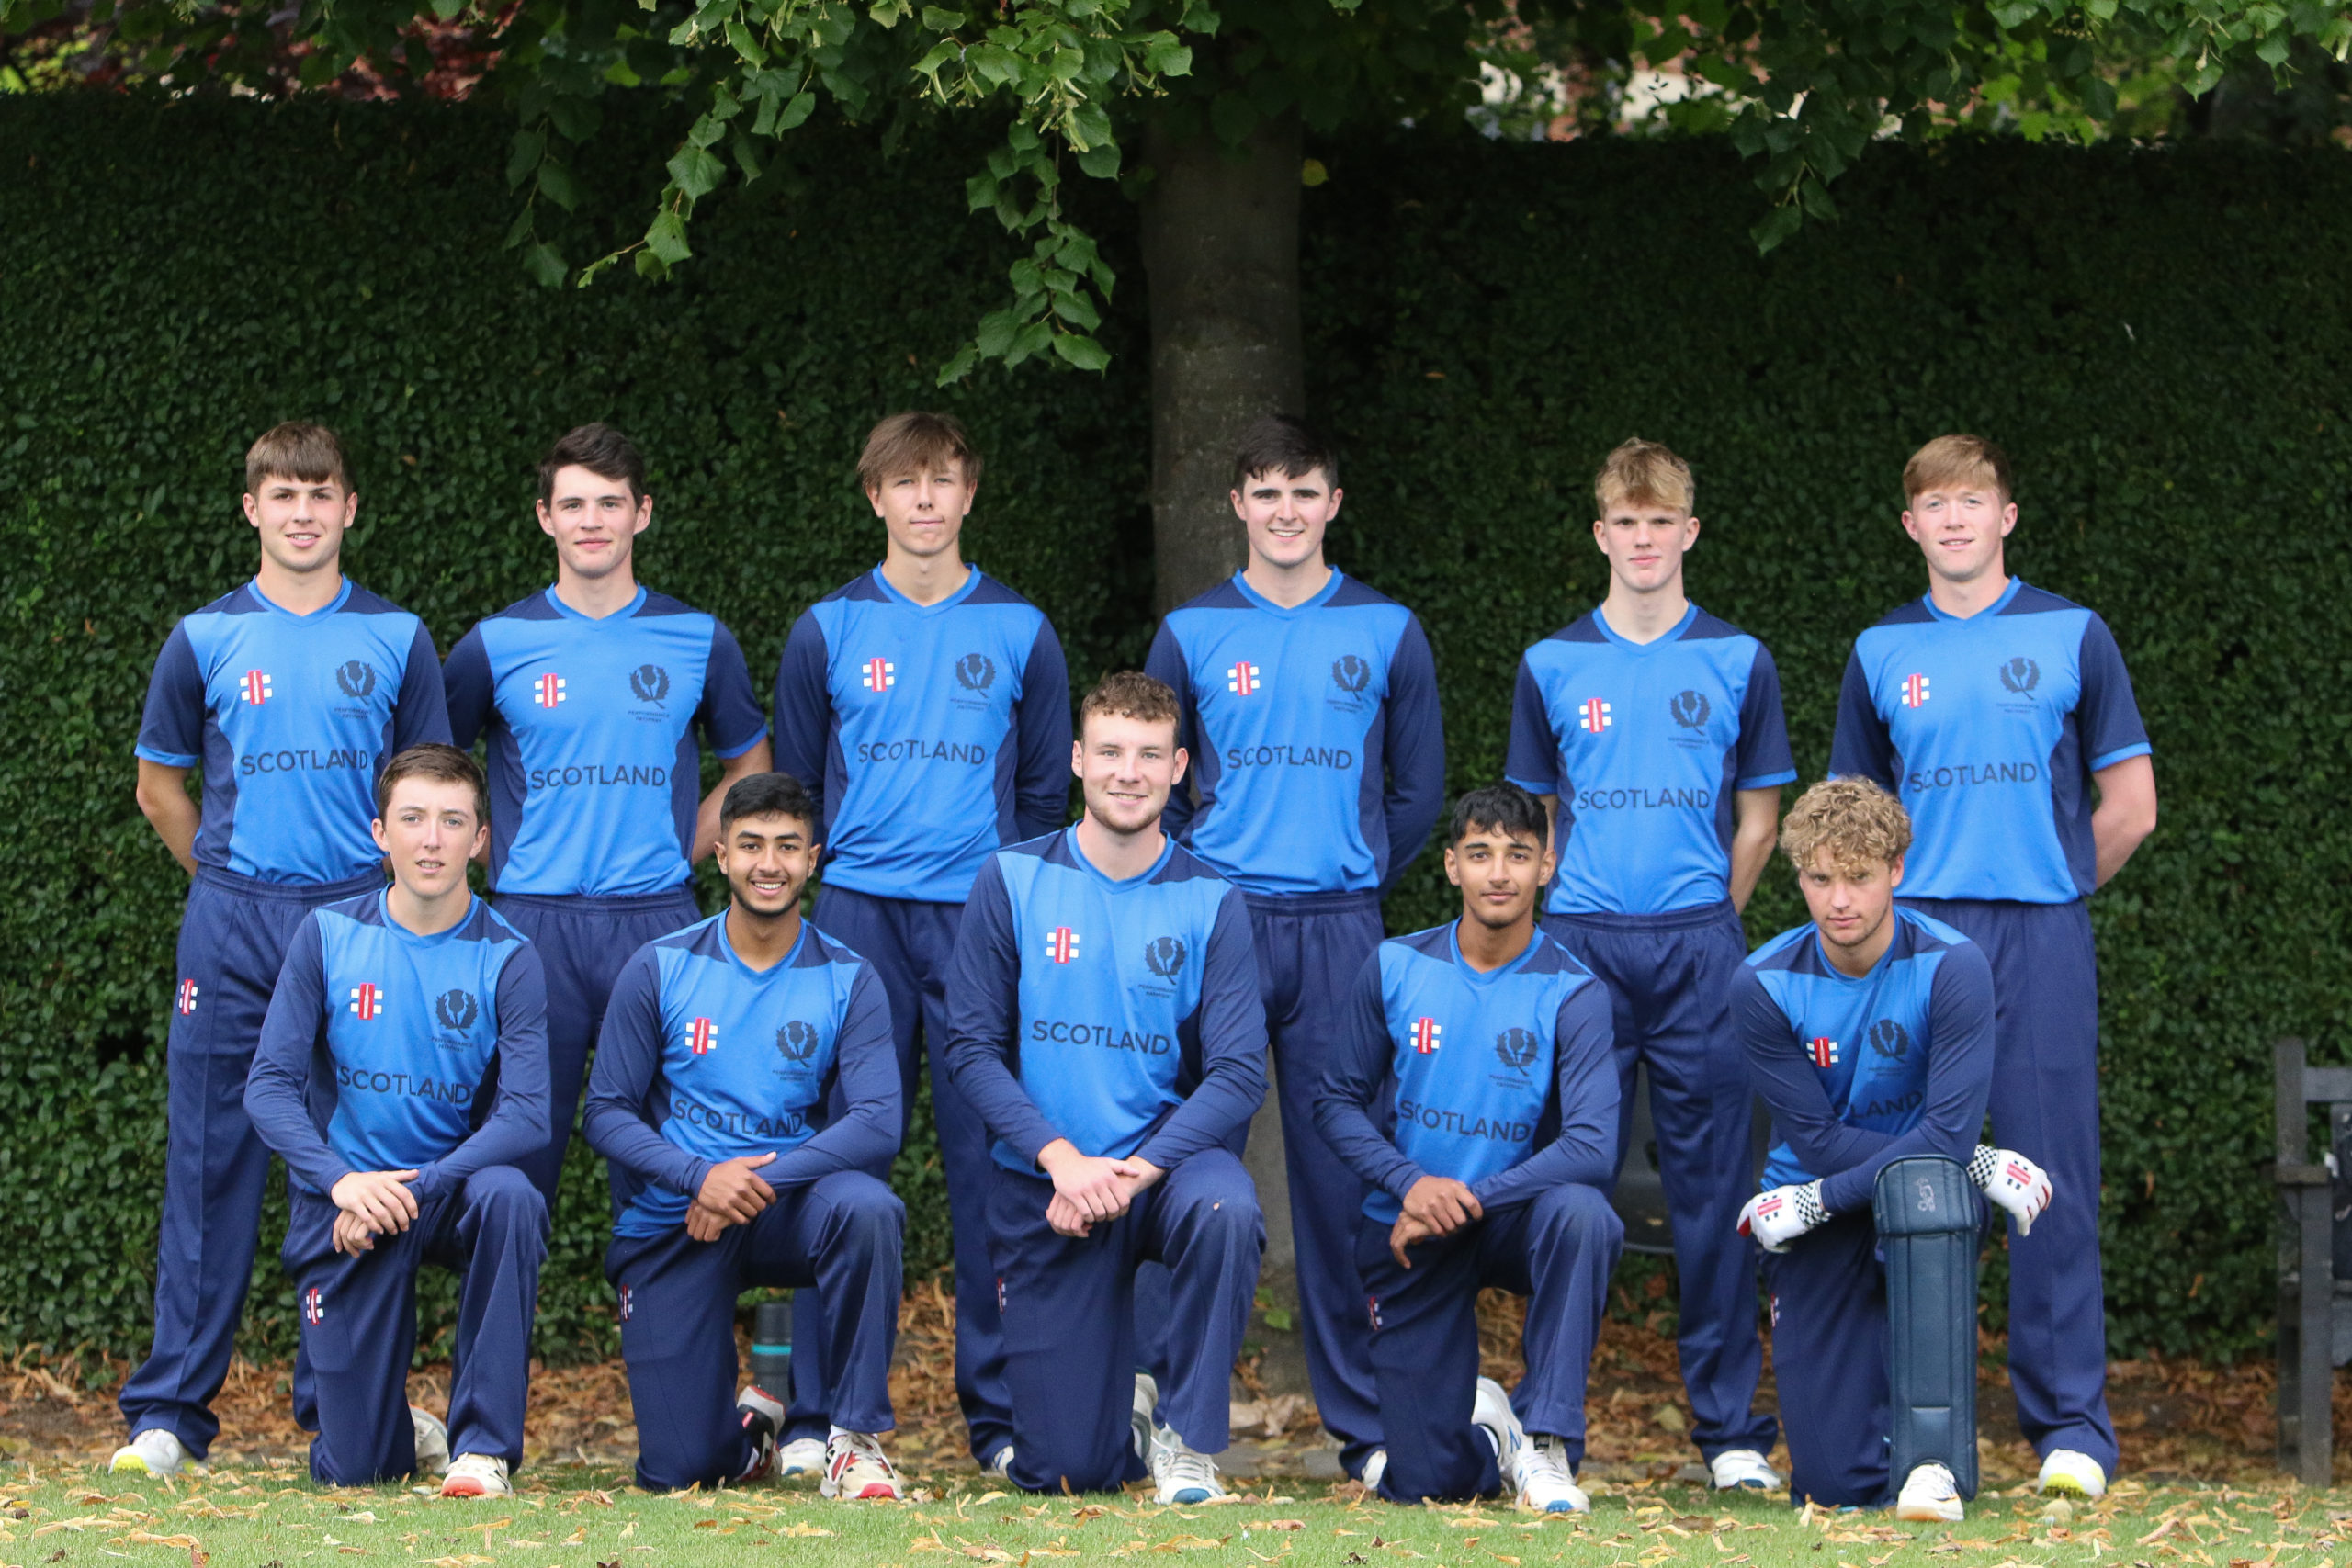 Cricket Scotland announce experienced squad for ICC U19 World Cup Qualifier